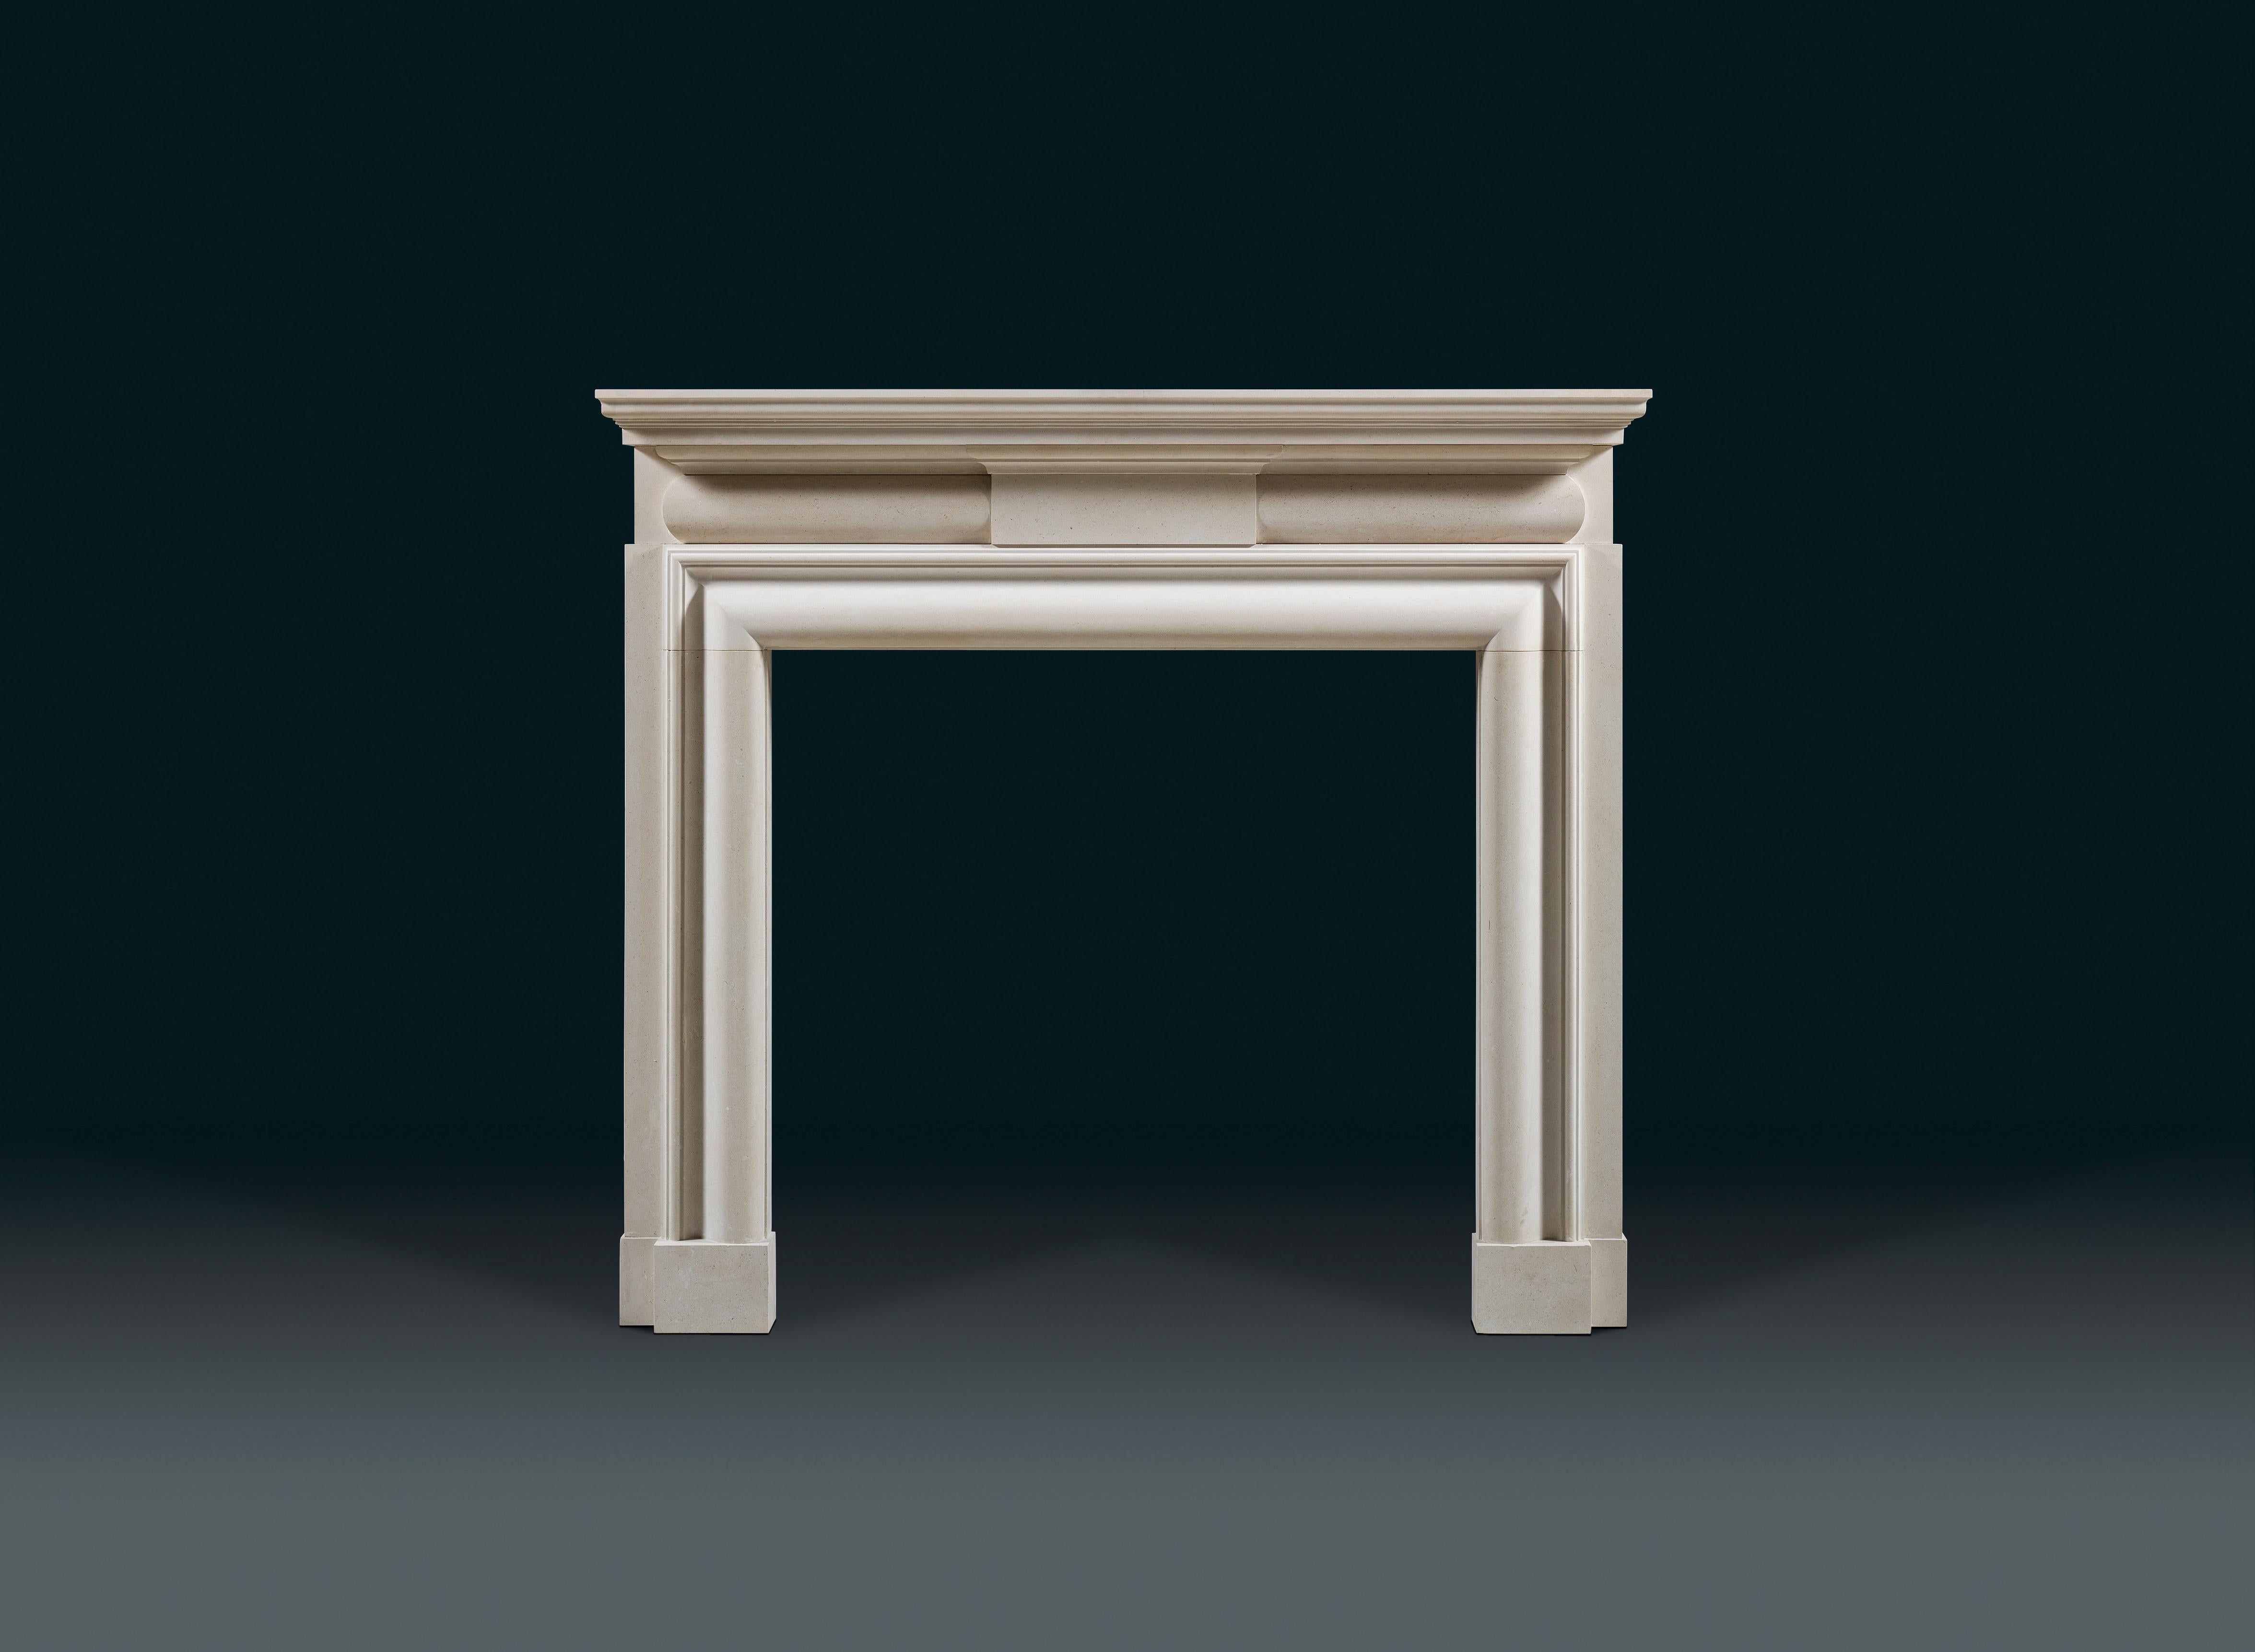 Contemporary Jamb Lutyens Bolection Reproduction Georgian Chimneypiece Is Portland Stone For Sale